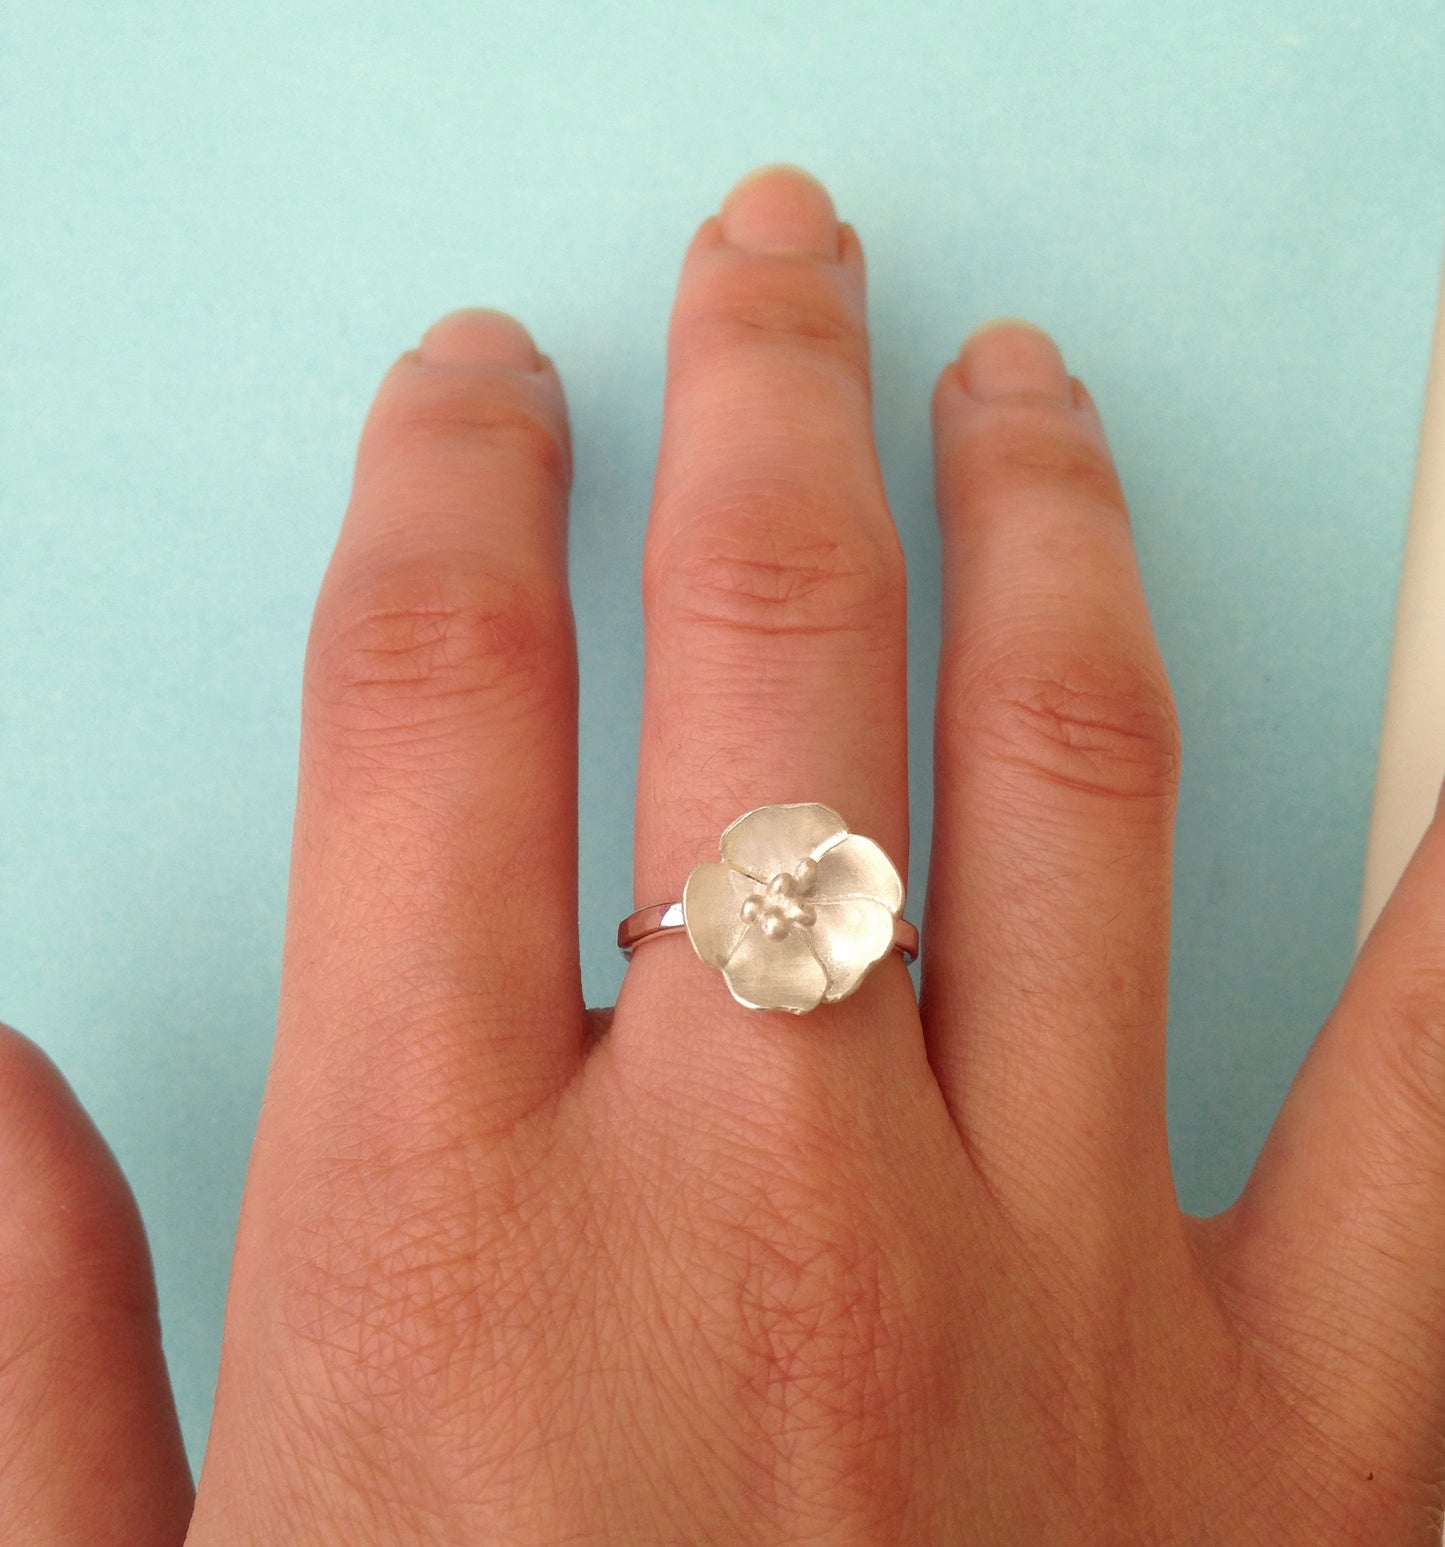 Buttercup Sterling Silver Flower Ring, Summer Jewellery